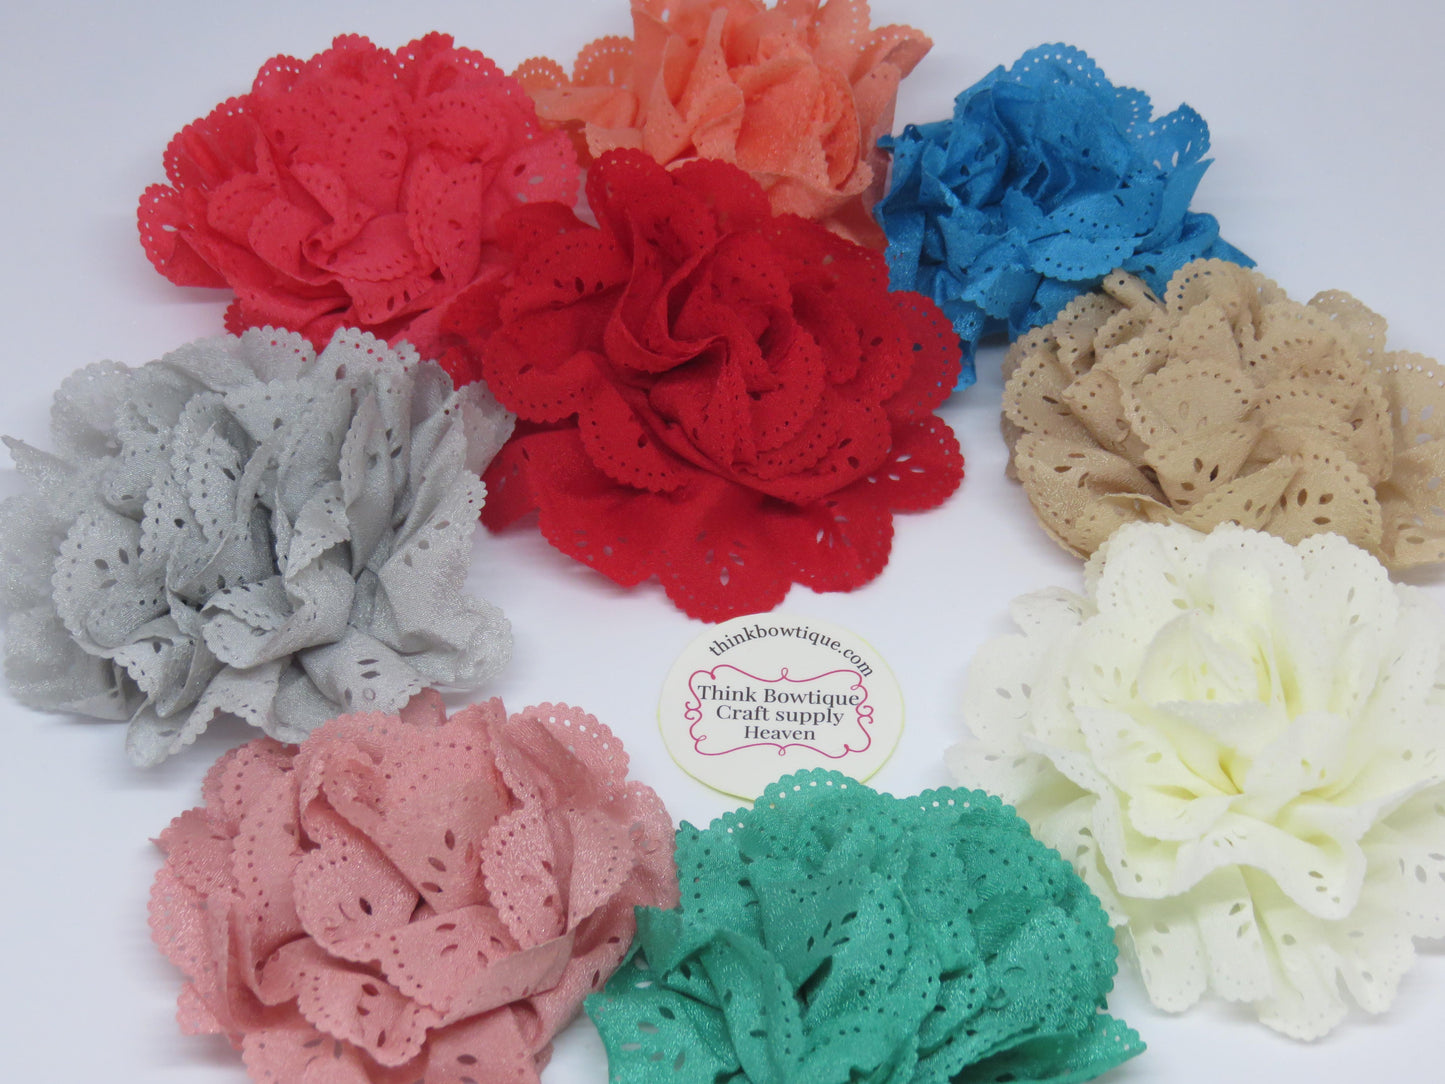 9cm Lace flowers for your craft supplies in Australia. 